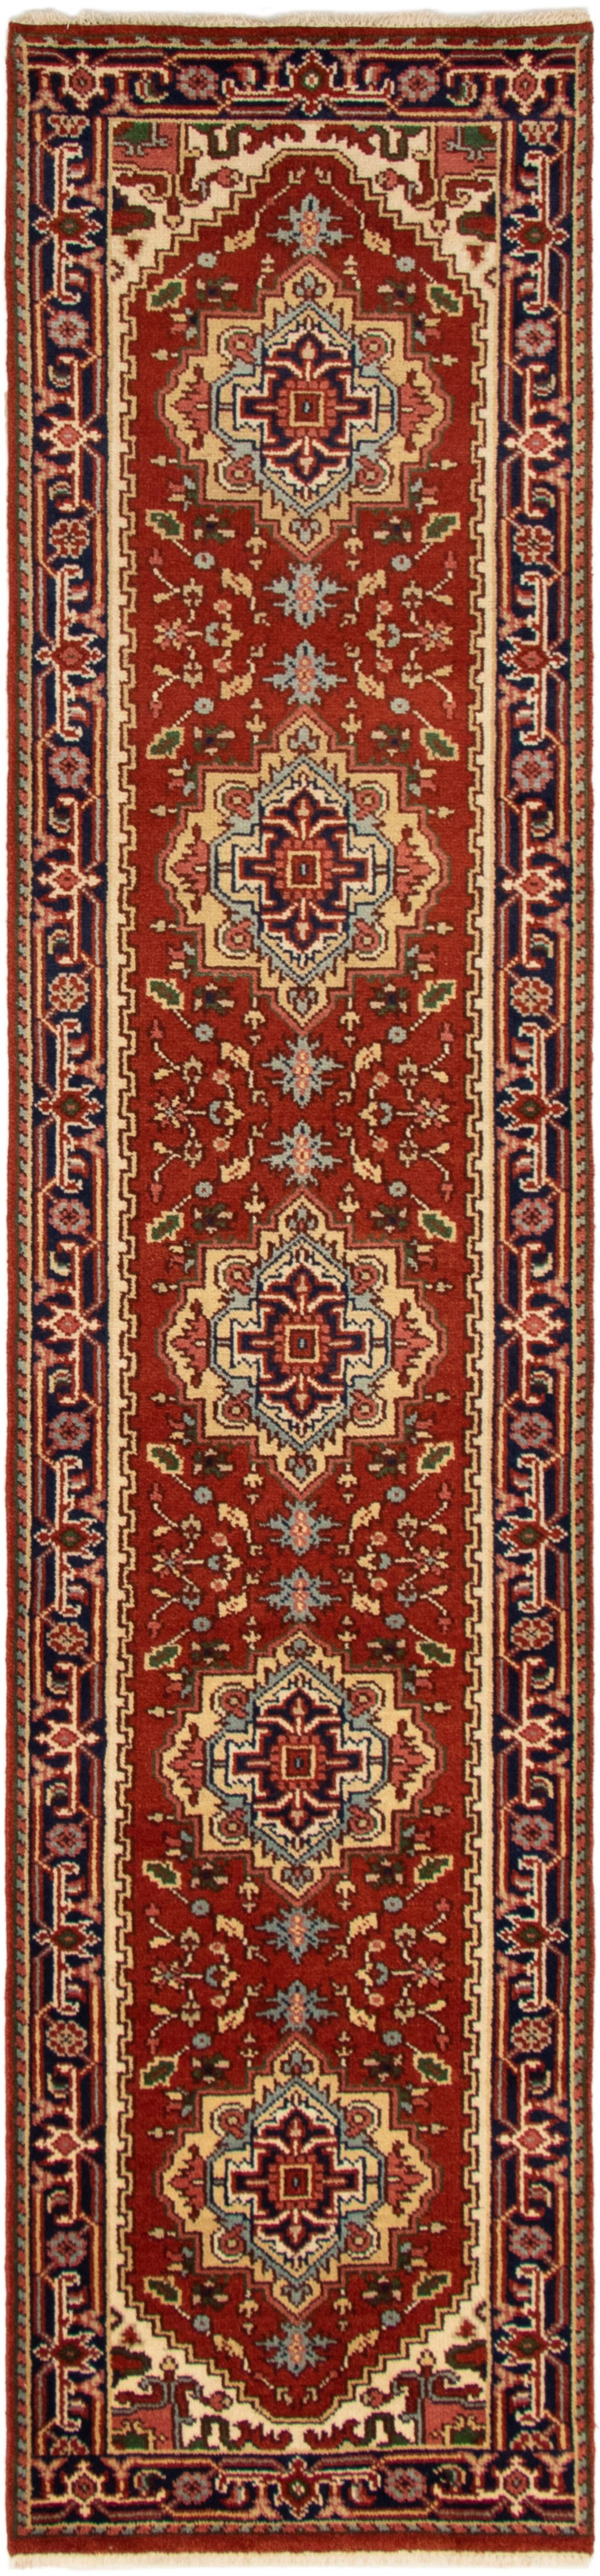 Hand-knotted Serapi Heritage Dark Copper Wool Rug 2'7" x 12'0"  Size: 2'7" x 12'0"  